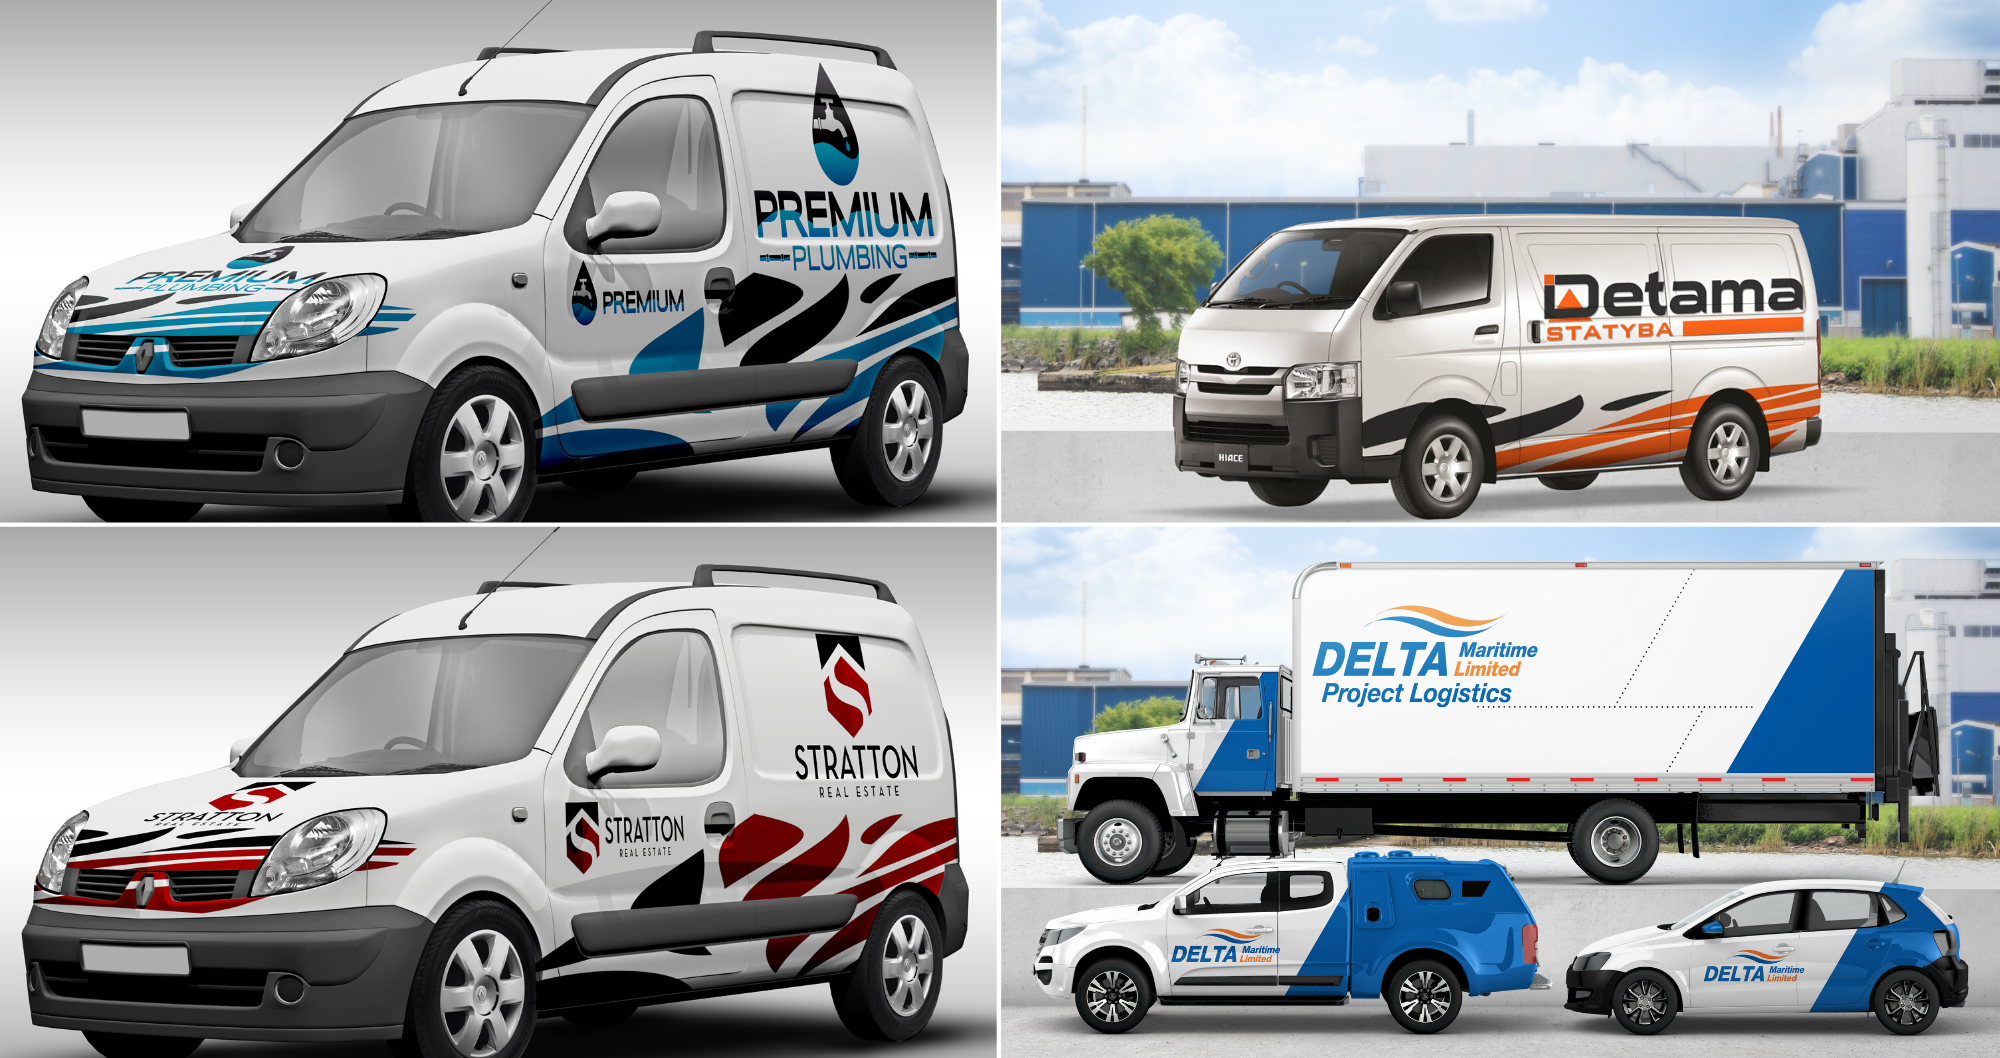 Download I will put your logo on 3d car, truck, van or vehicle wrap design mockup for $10 - SEOClerks